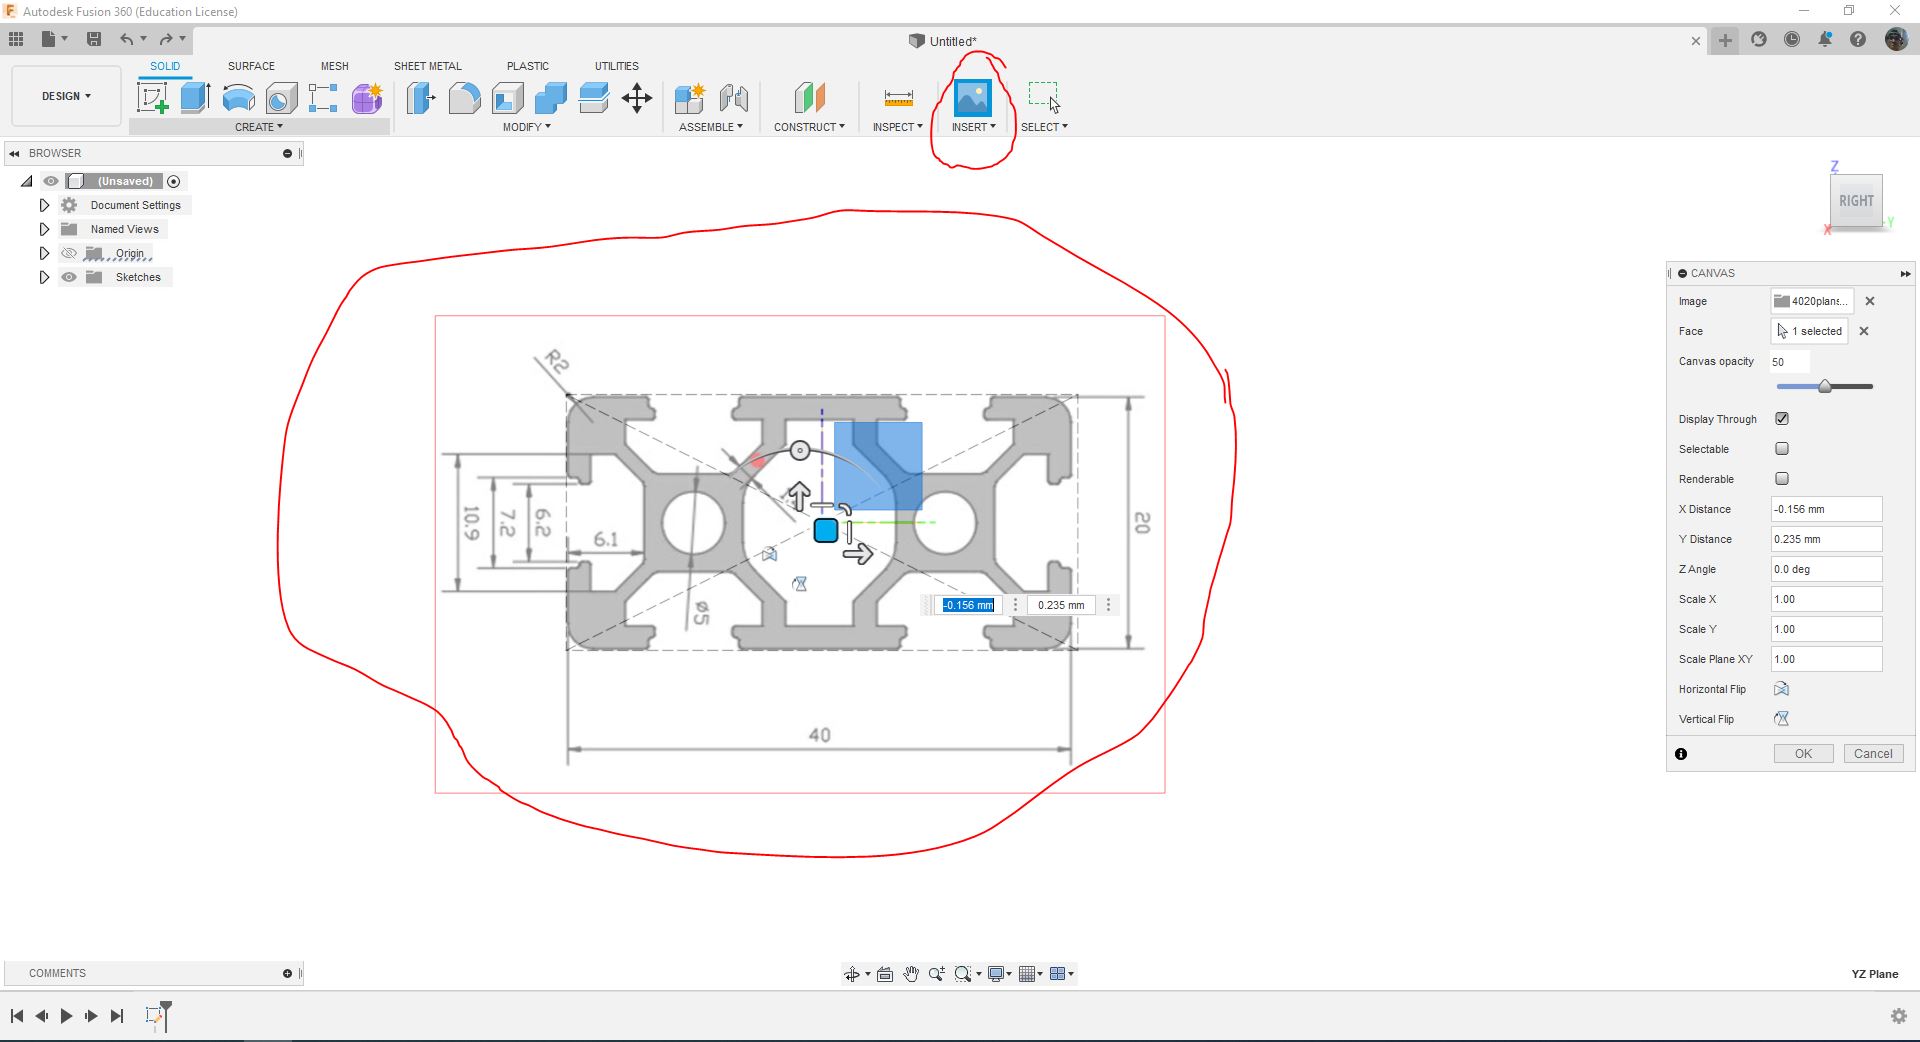 Create and run scripts with the Fusion 360 API - MFS